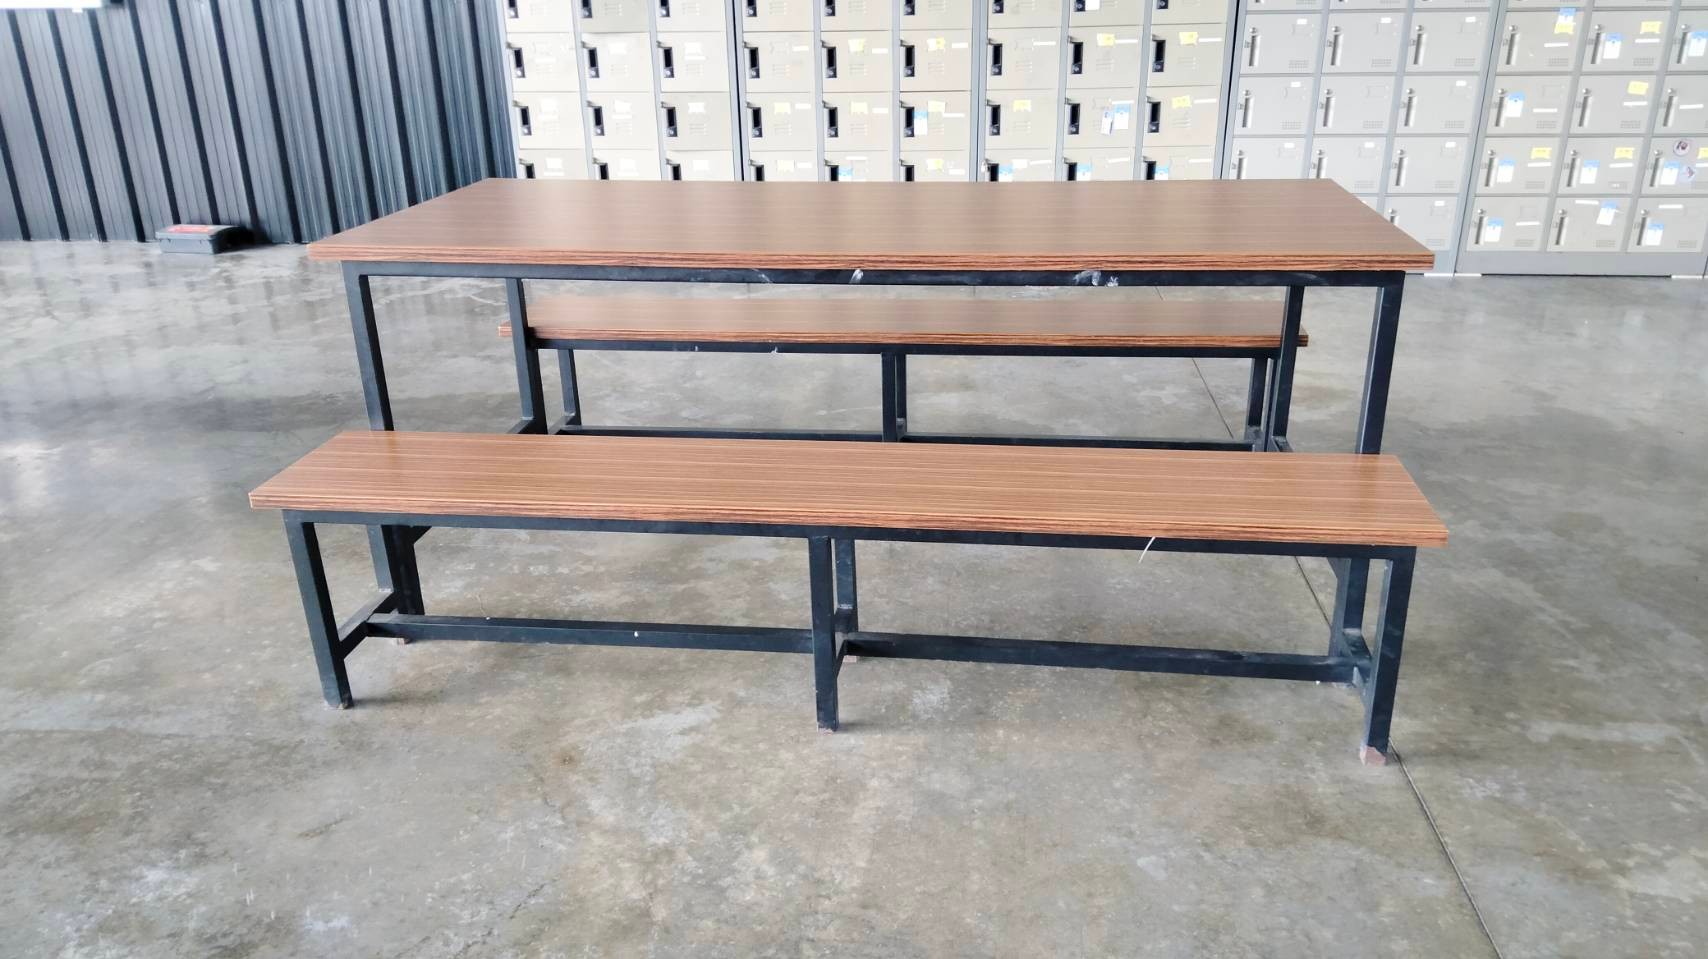 69063::DF-02-TABLE-BENCH::A Tokai canteen set with 2 benches. Table Dimension (WxDxH) cm : 182.9x76x75. Bench Dimension (WxDxH) cm : 182.9x30x43 Dining Sets